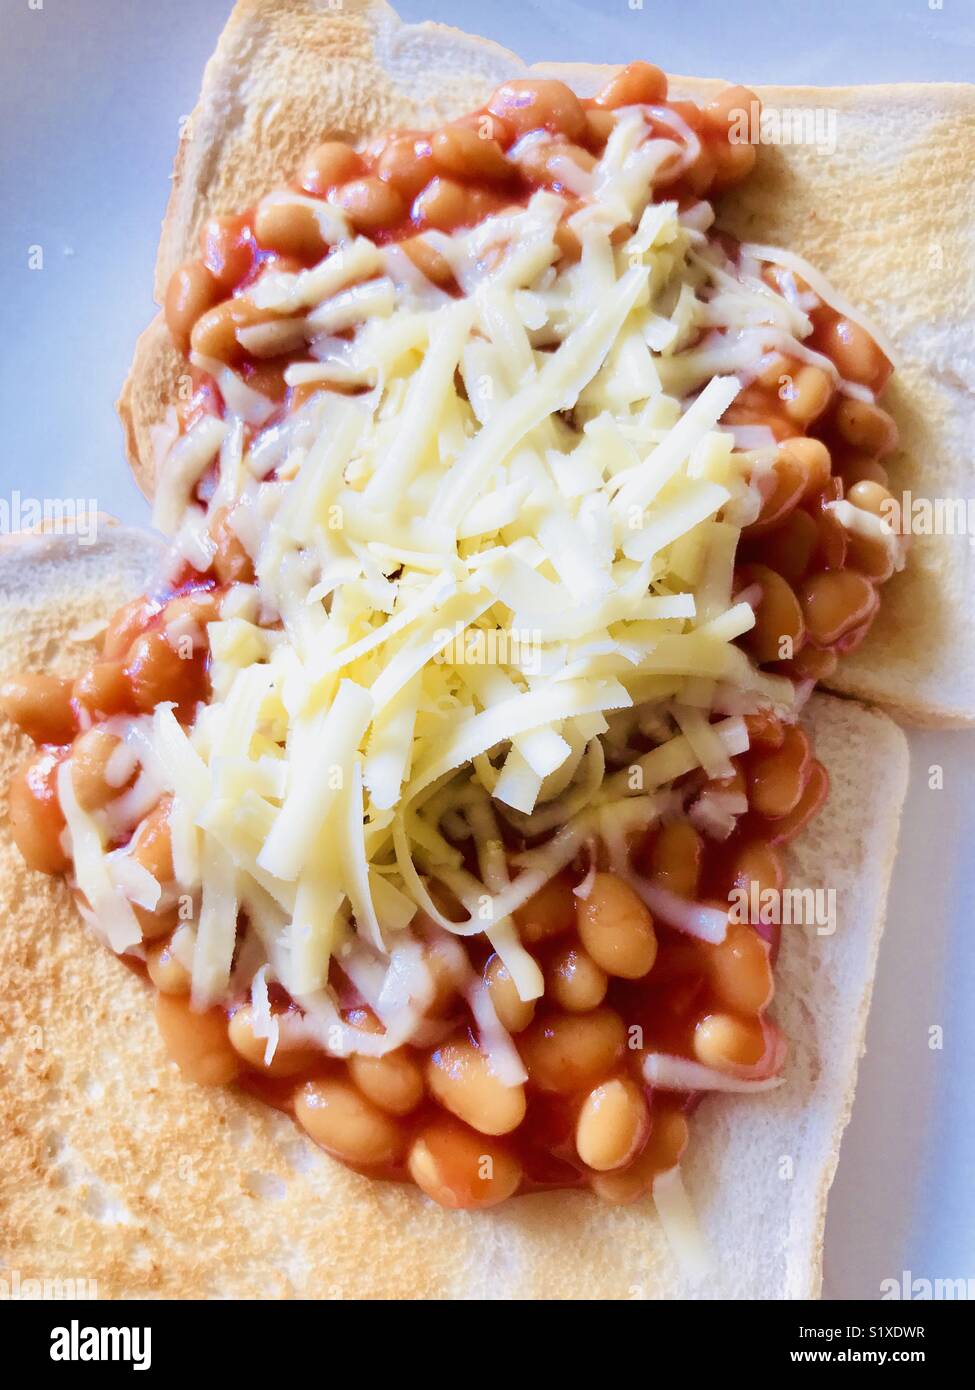 Beans on toast with grated cheese Stock Photo